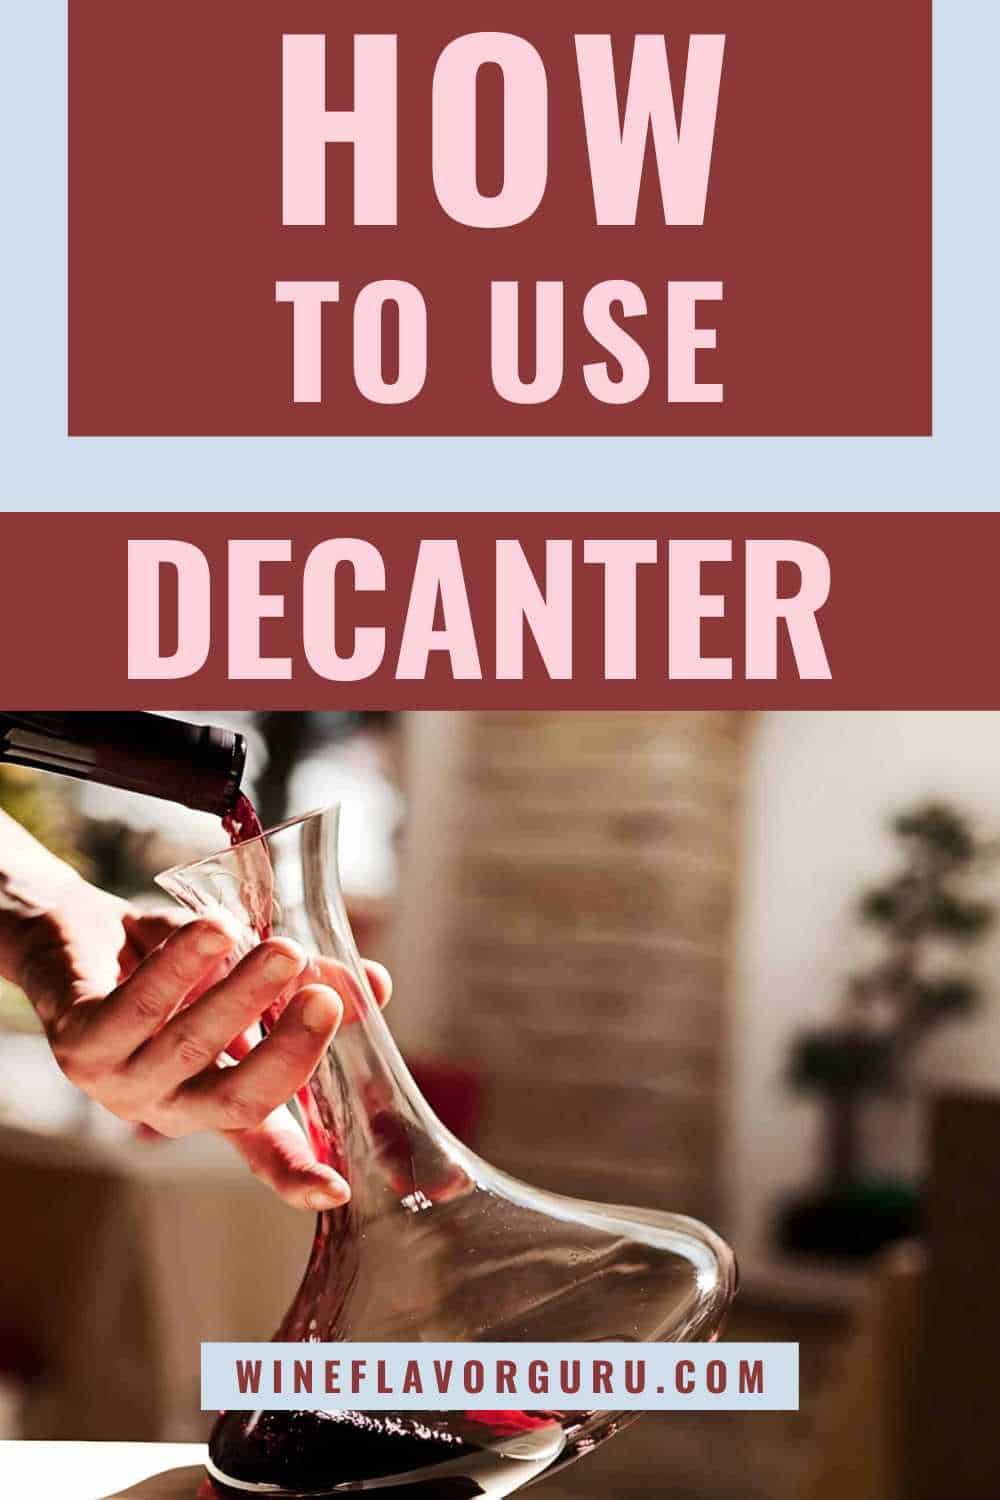 What Is a Decanter and How to Use It